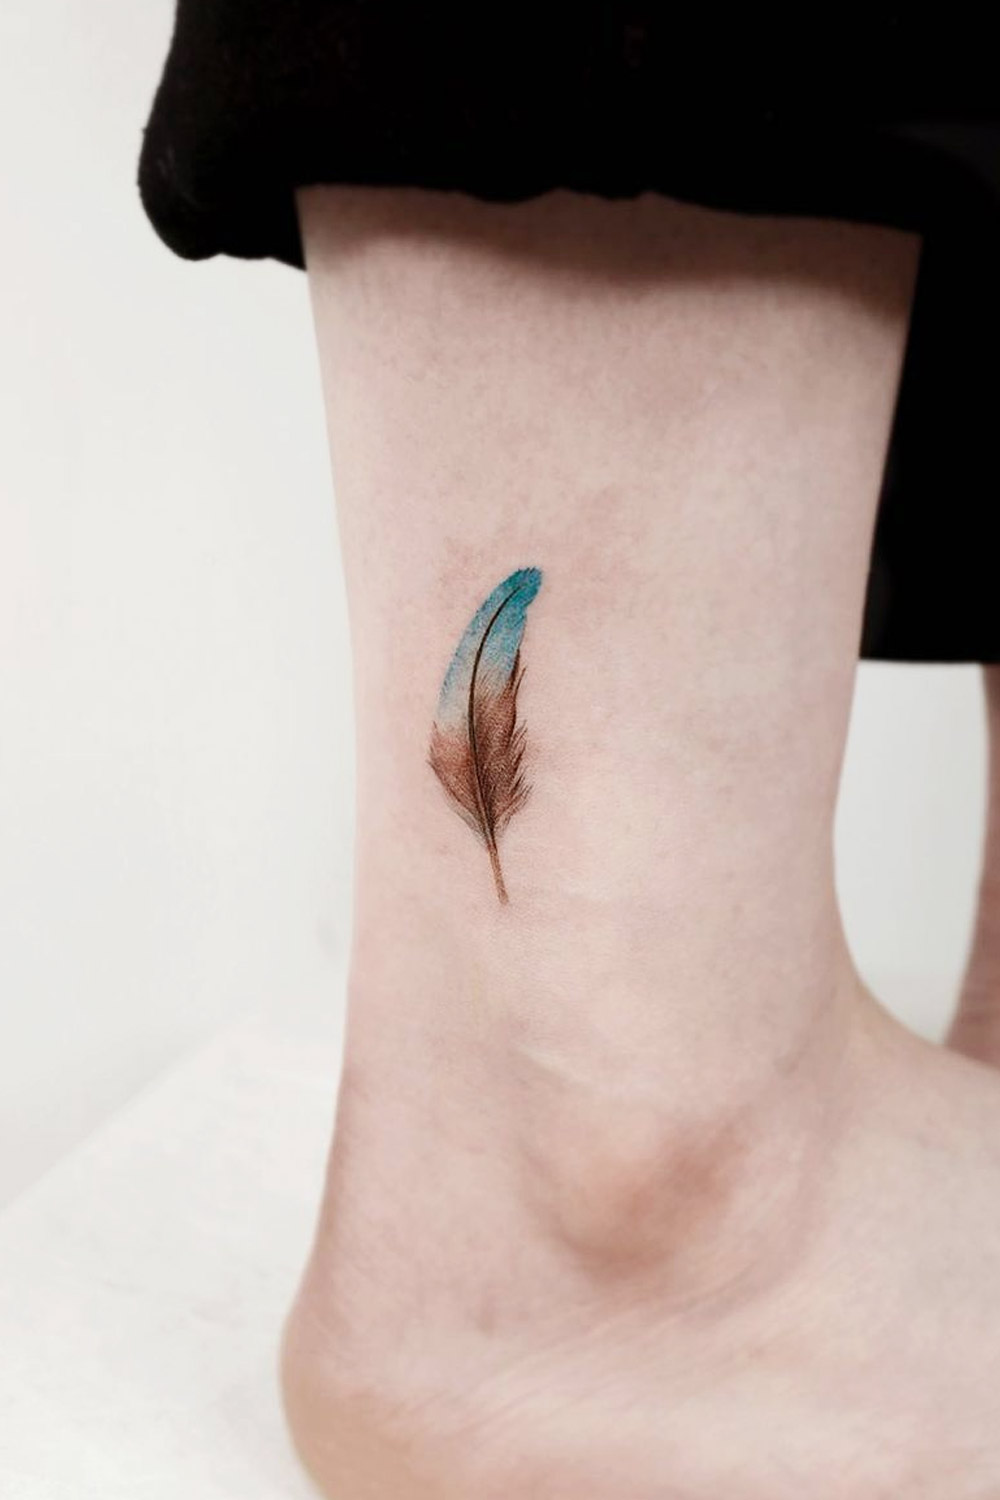 40 Most Popular Feather Tattoos for Women and Men | Feather pen tattoo,  Eagle feather tattoos, Feather tattoo design